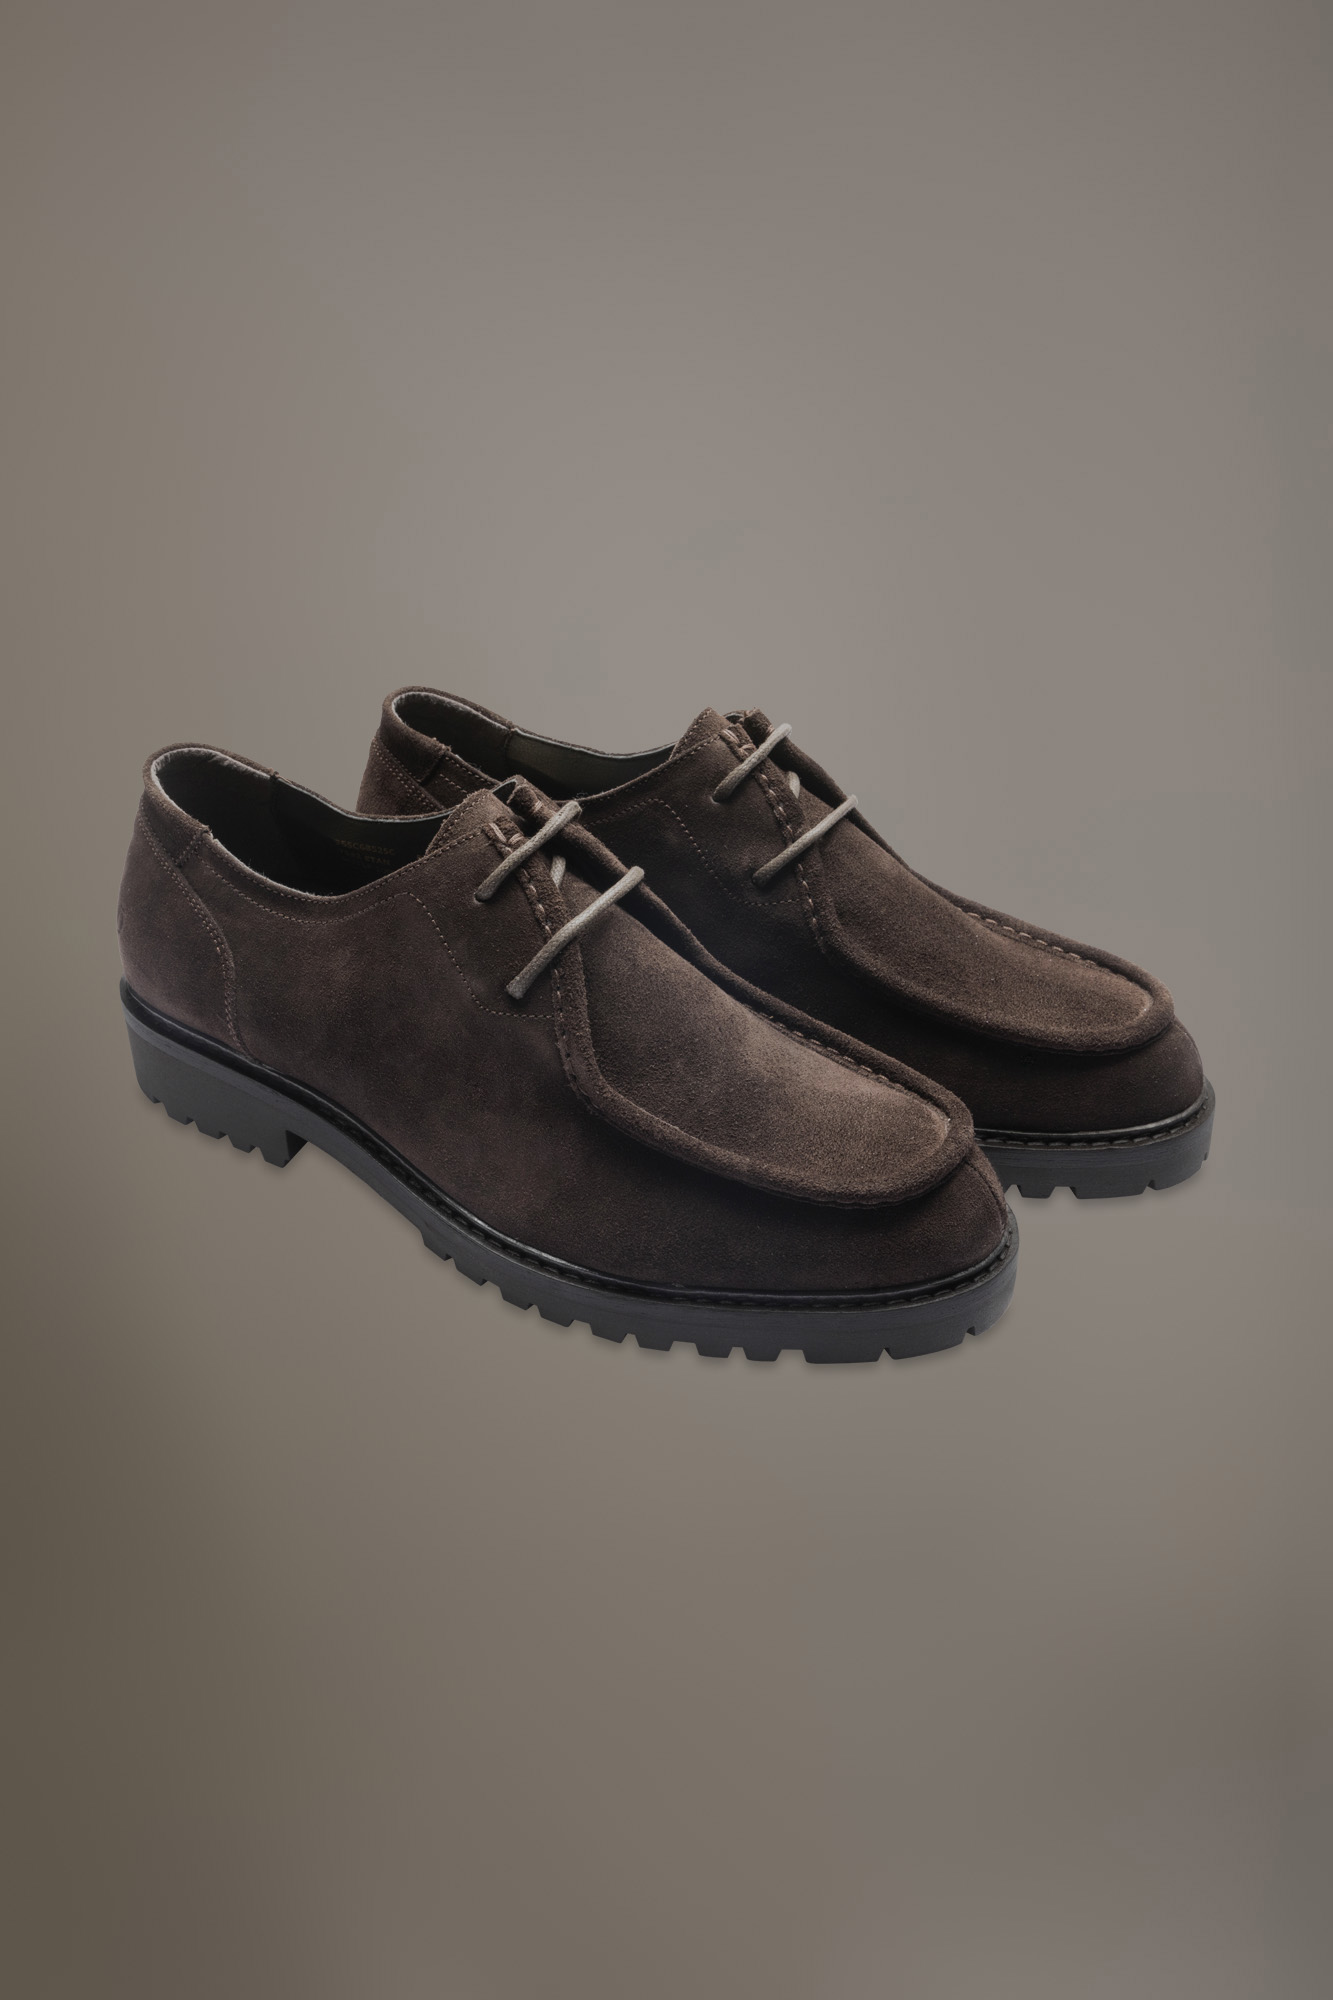 100% suede leather ranger shoe with rubber sole